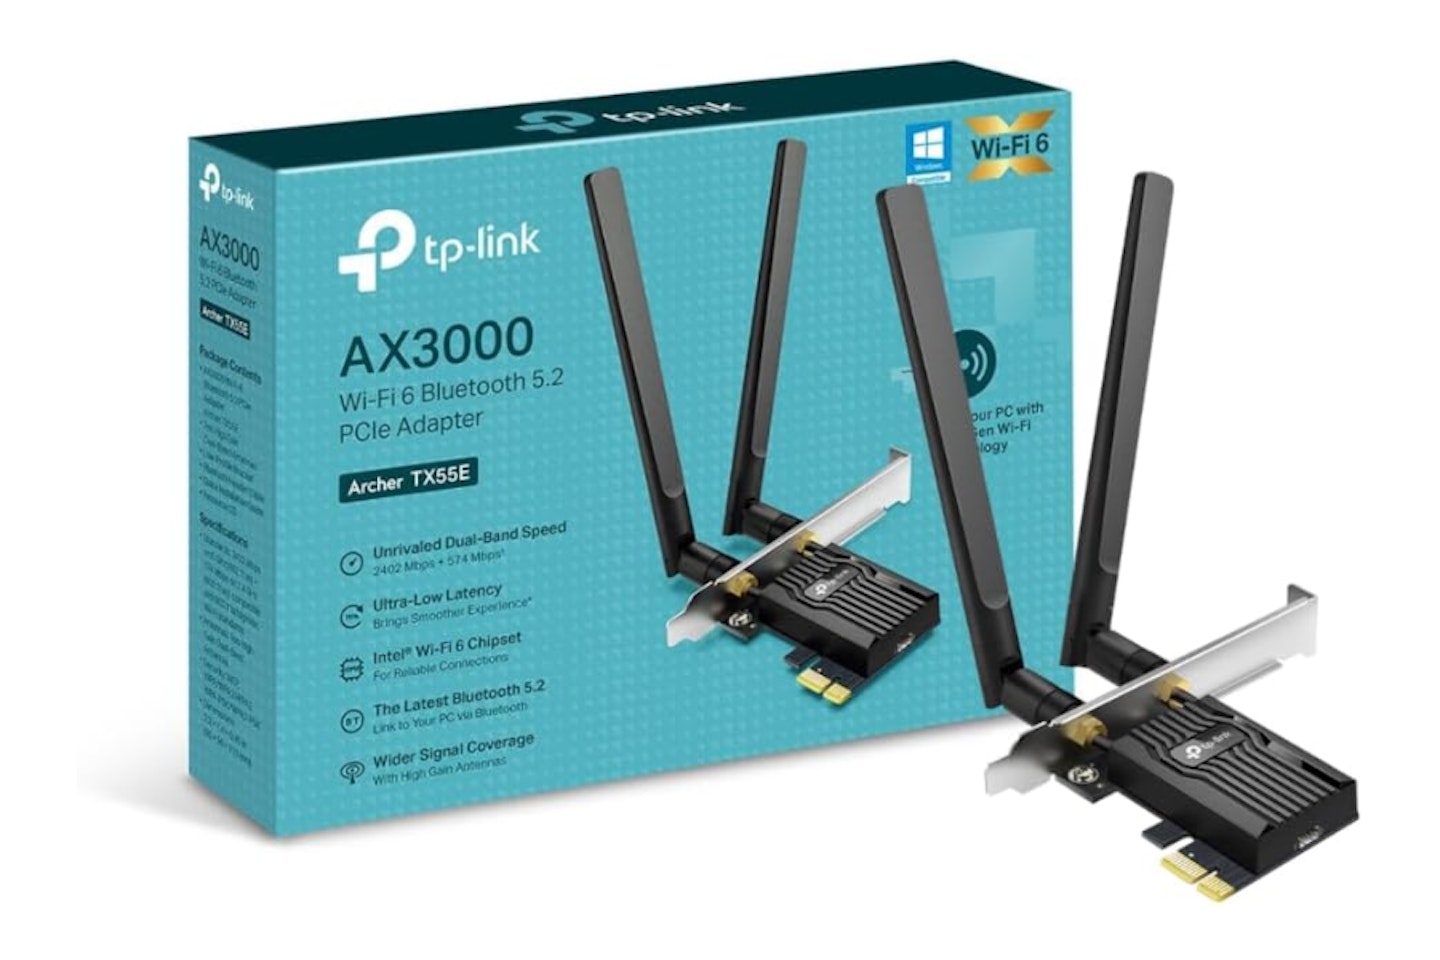 Best Wi-Fi cards for your PC in 2024